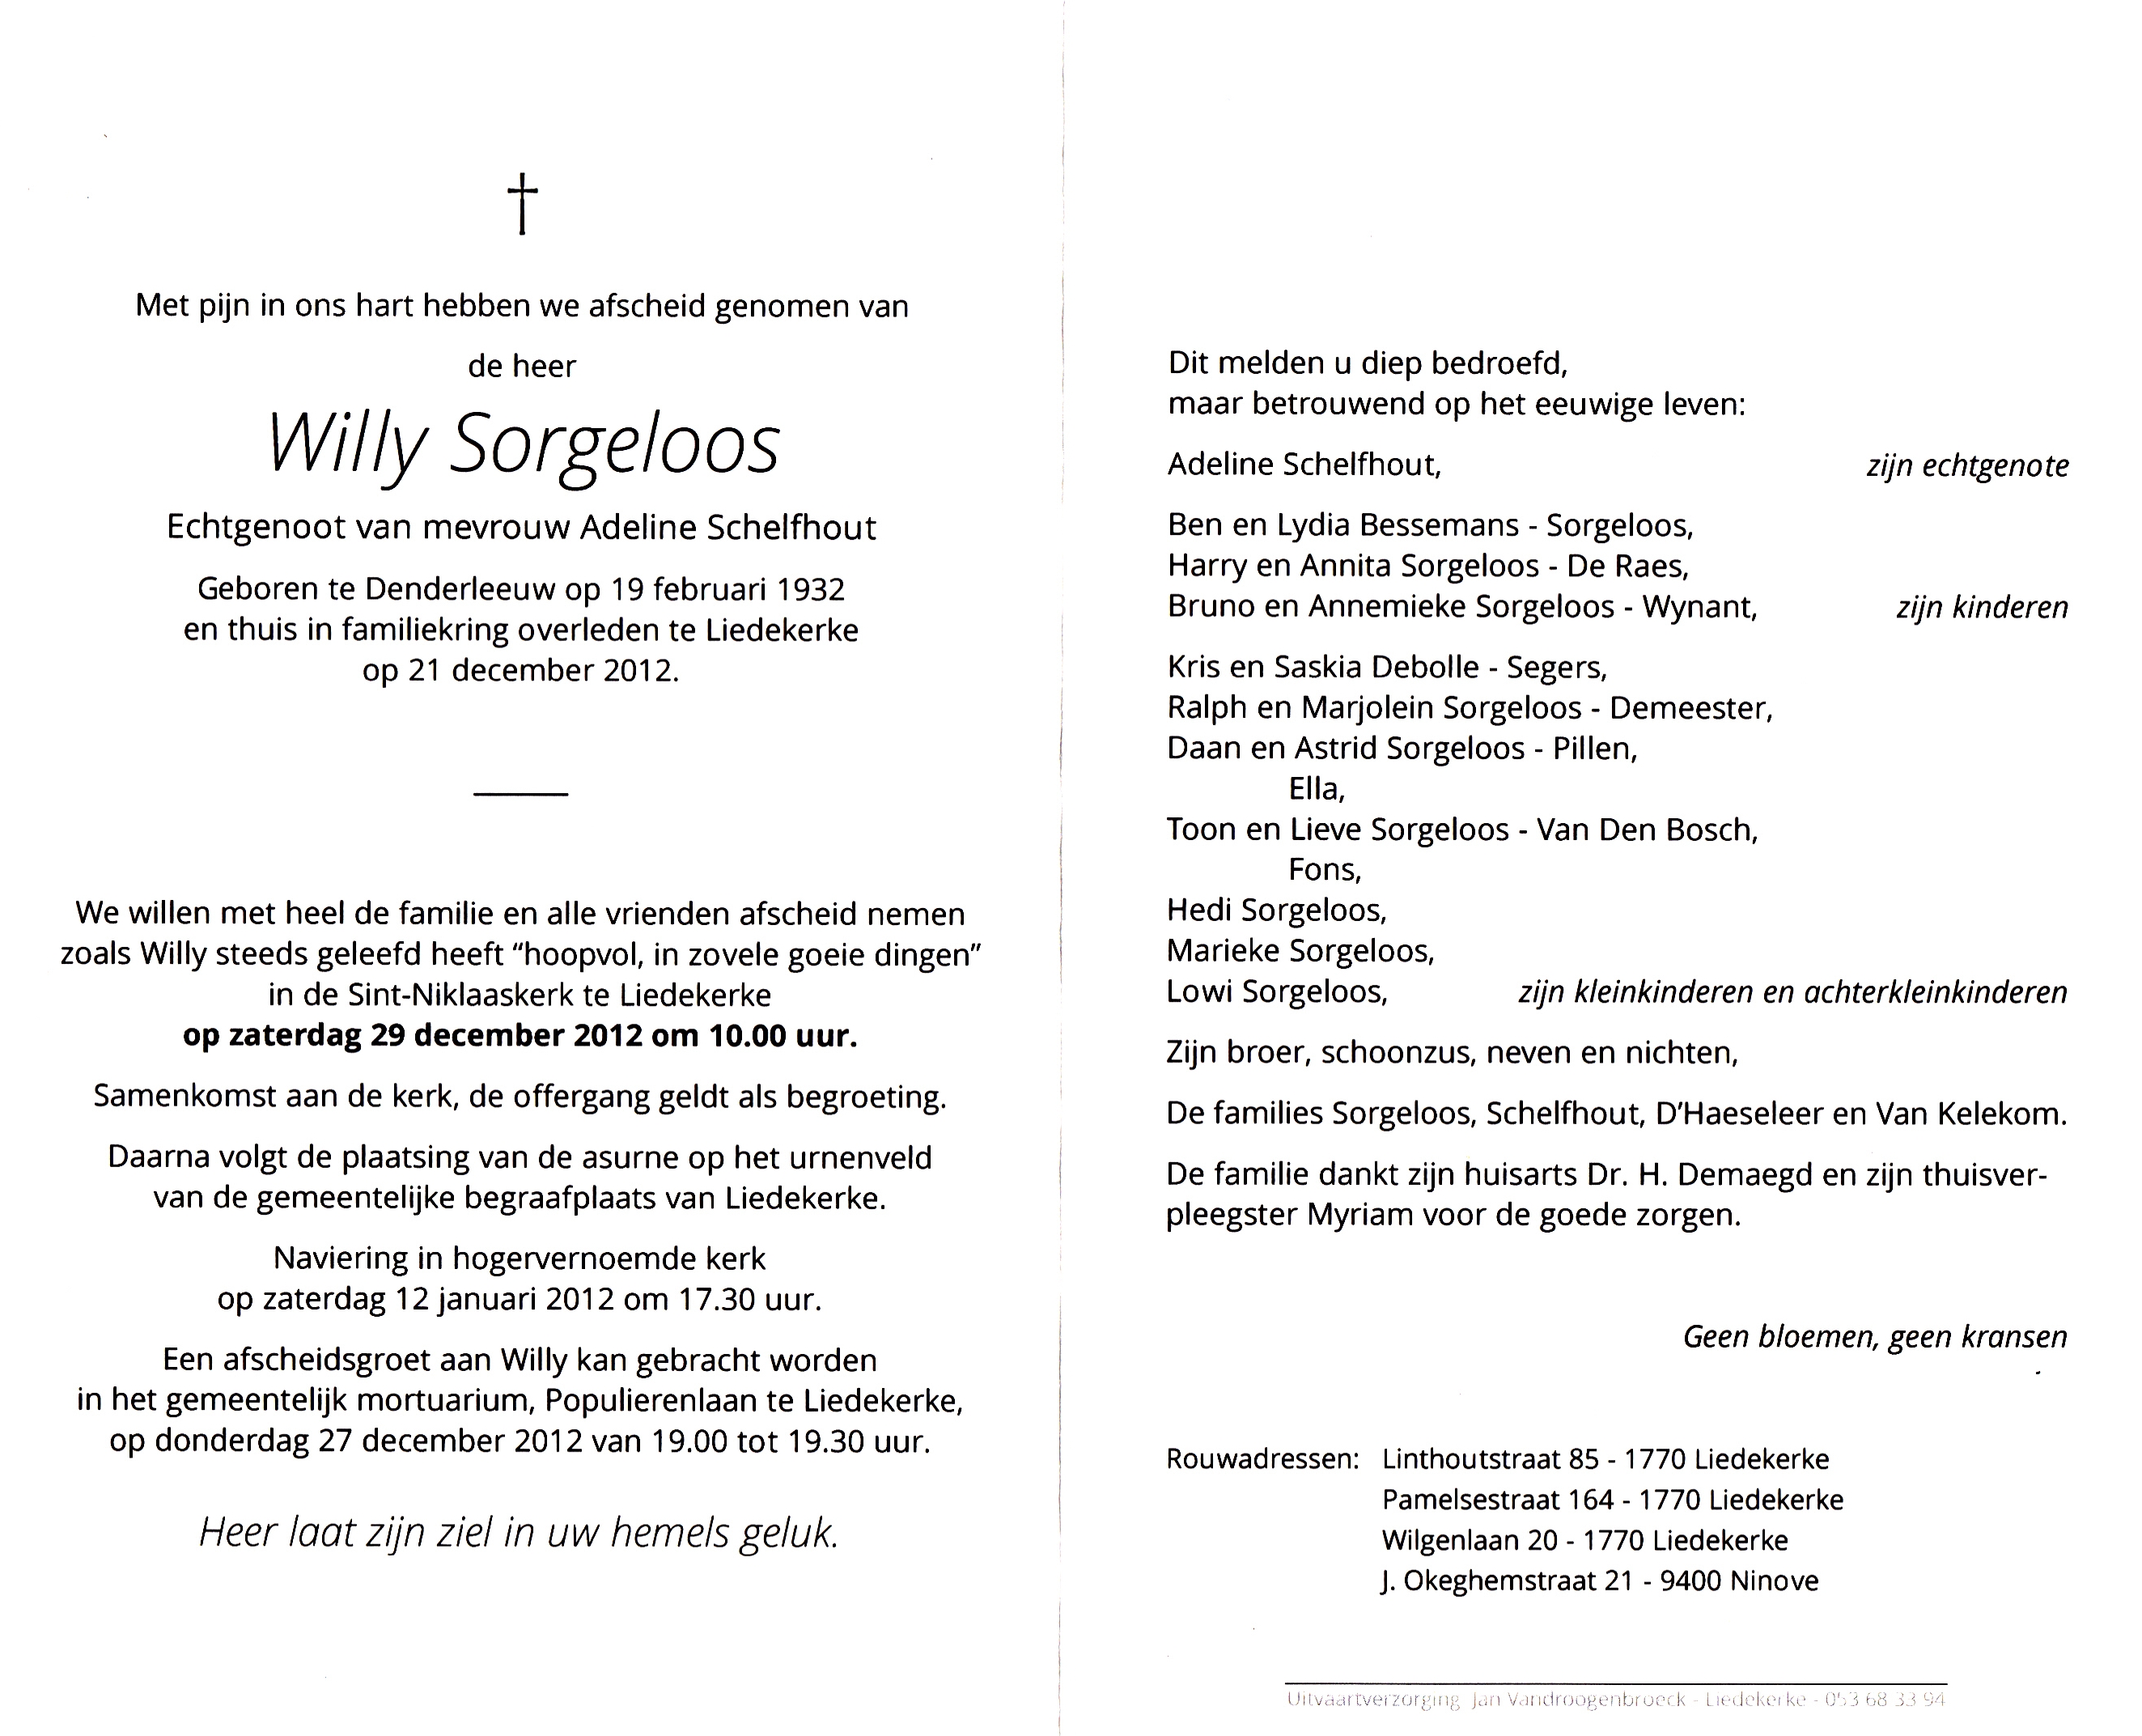 Sorgeloos Willy